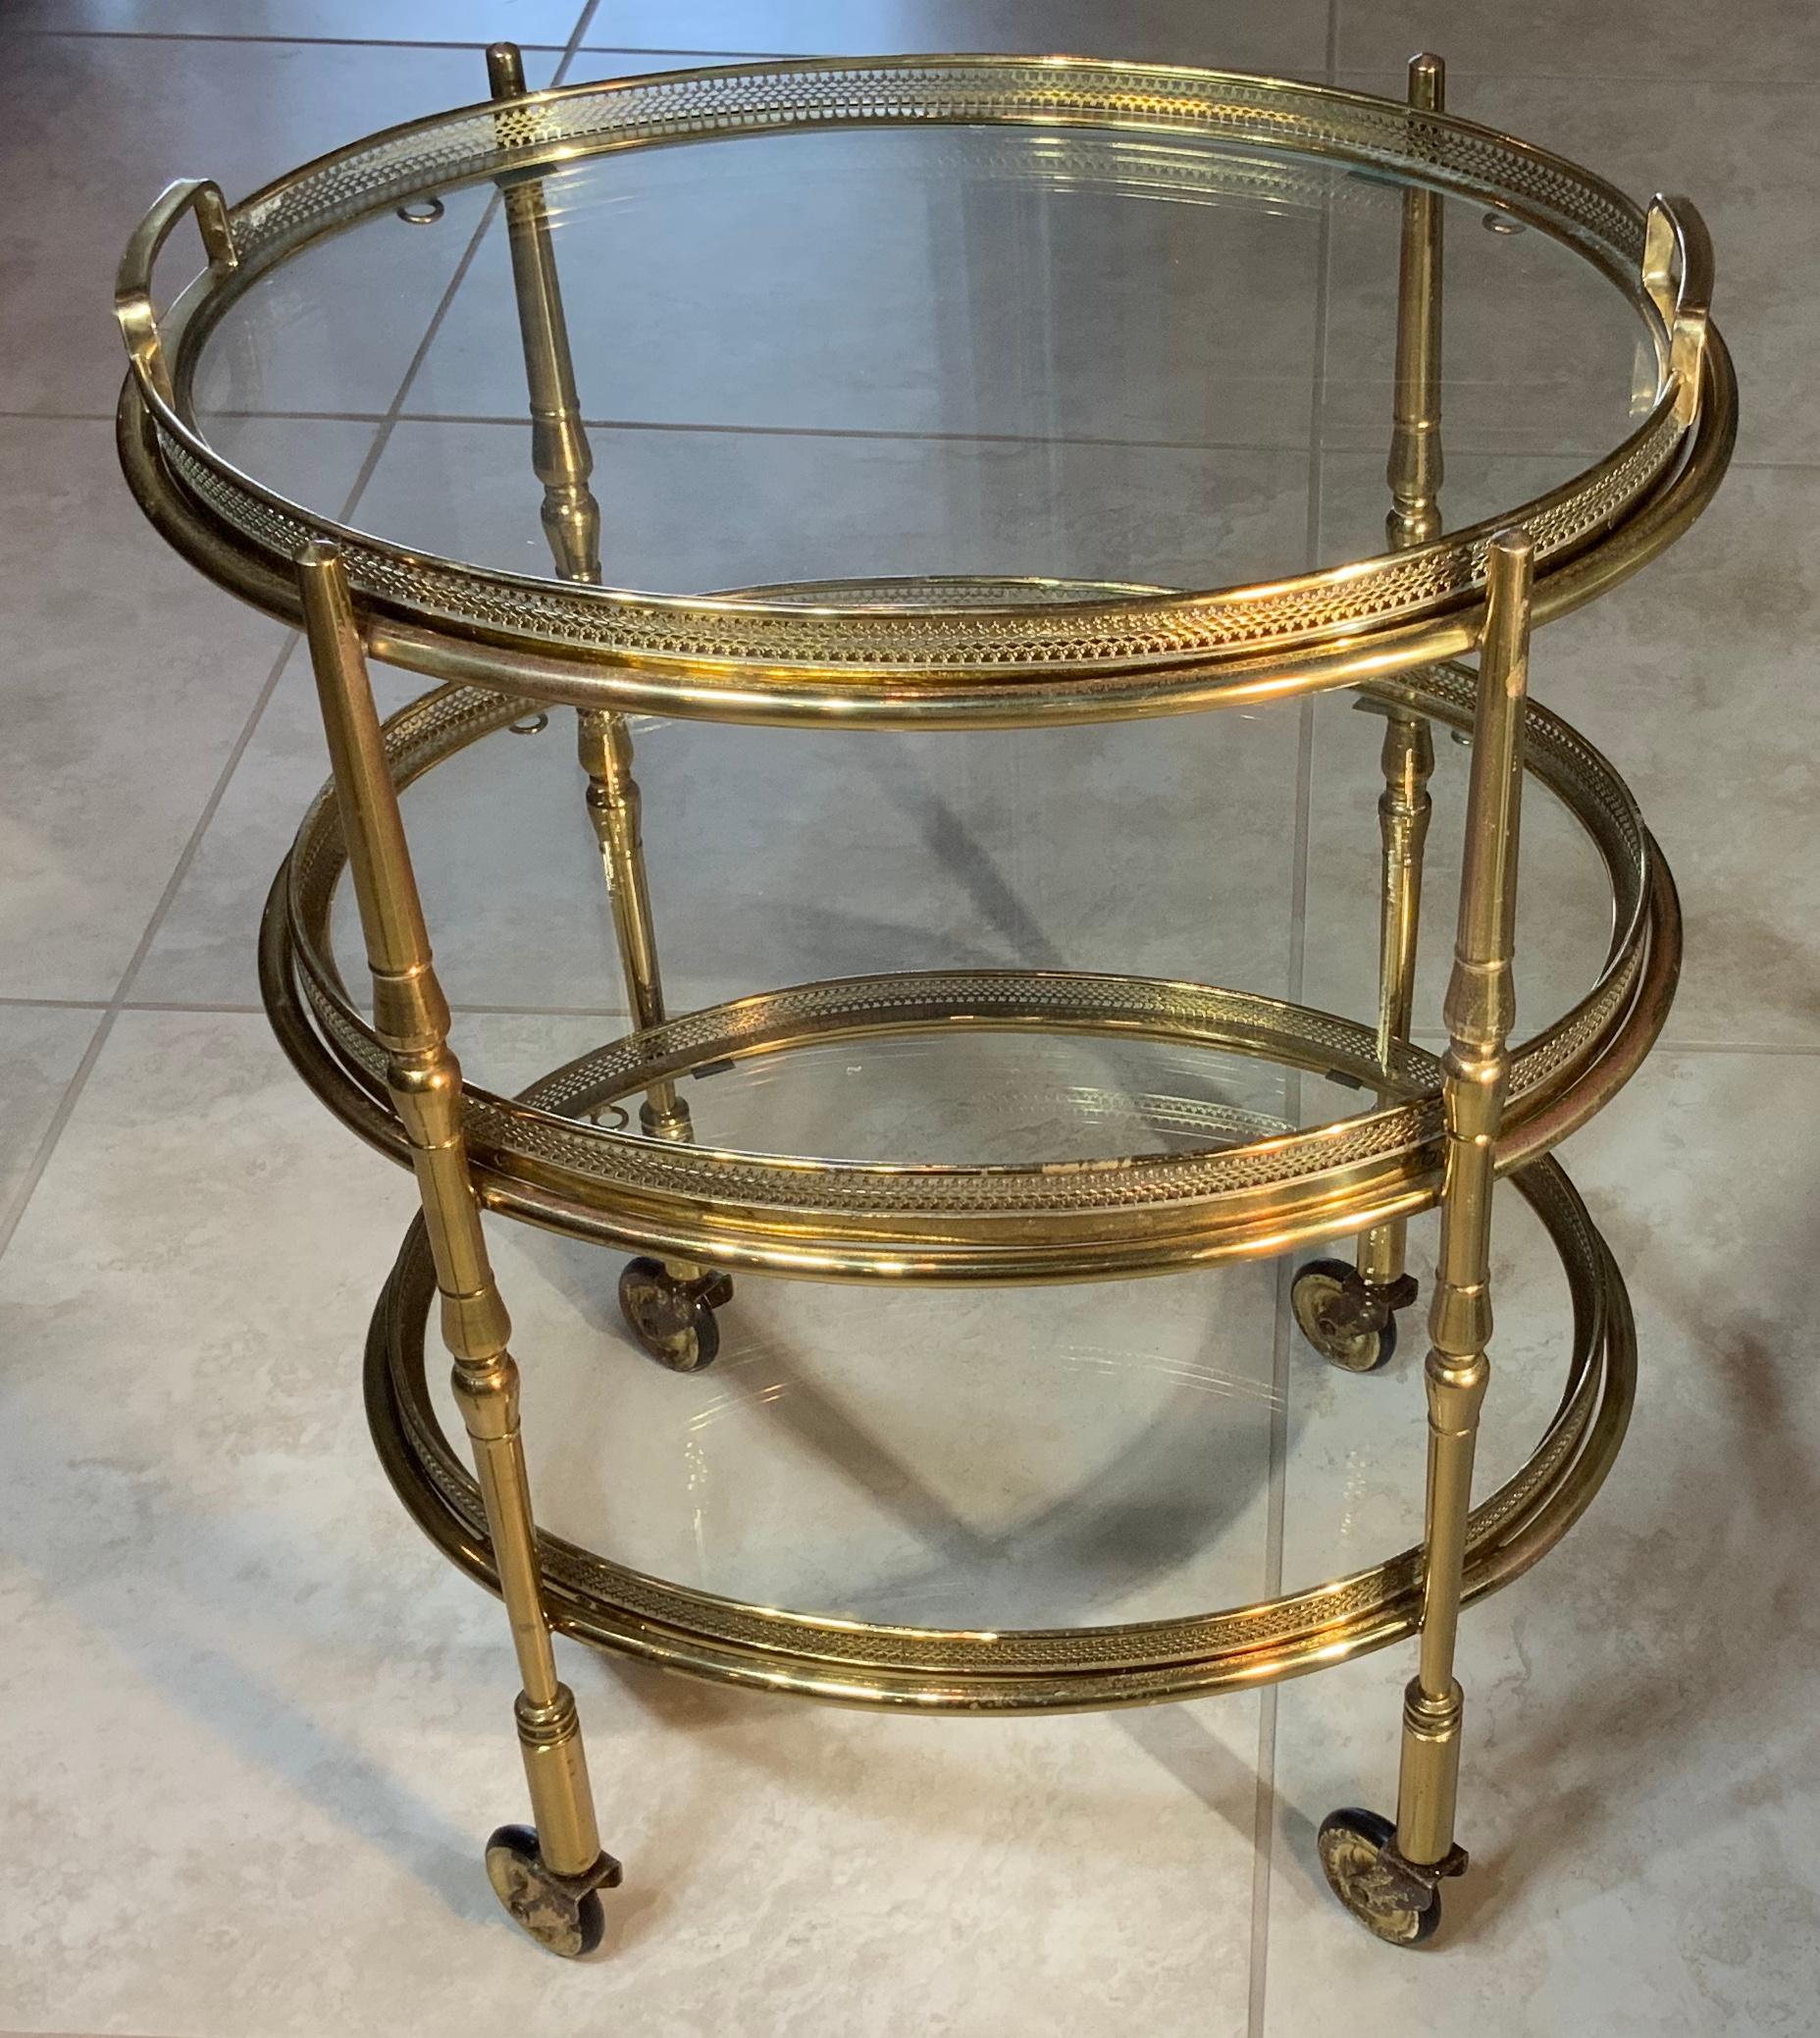 This elegant oval shape vintage rolling desert table made from three removable tray
Each tray has decorative brass trimming around and the top tray has utilitarian handles. Four straight legs with small wheels on the bottom.
Classic funky addition